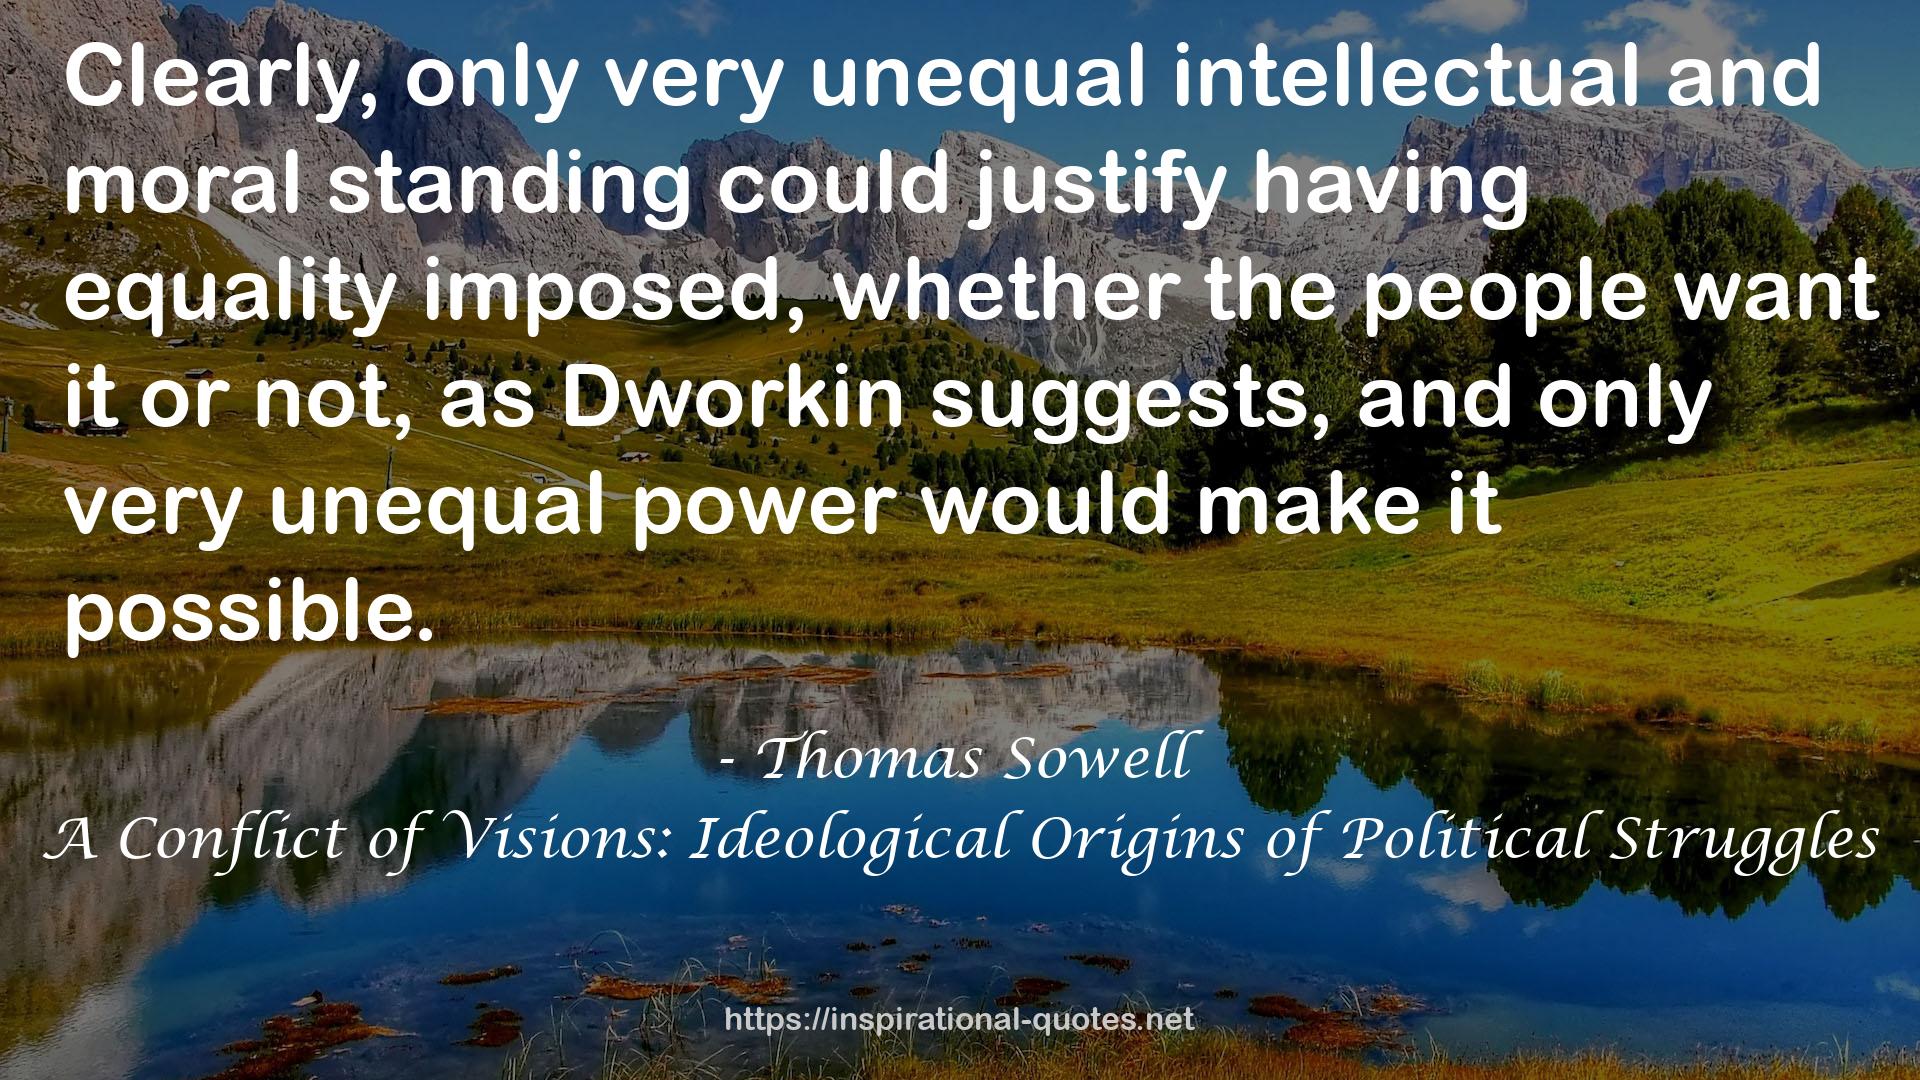 A Conflict of Visions: Ideological Origins of Political Struggles QUOTES